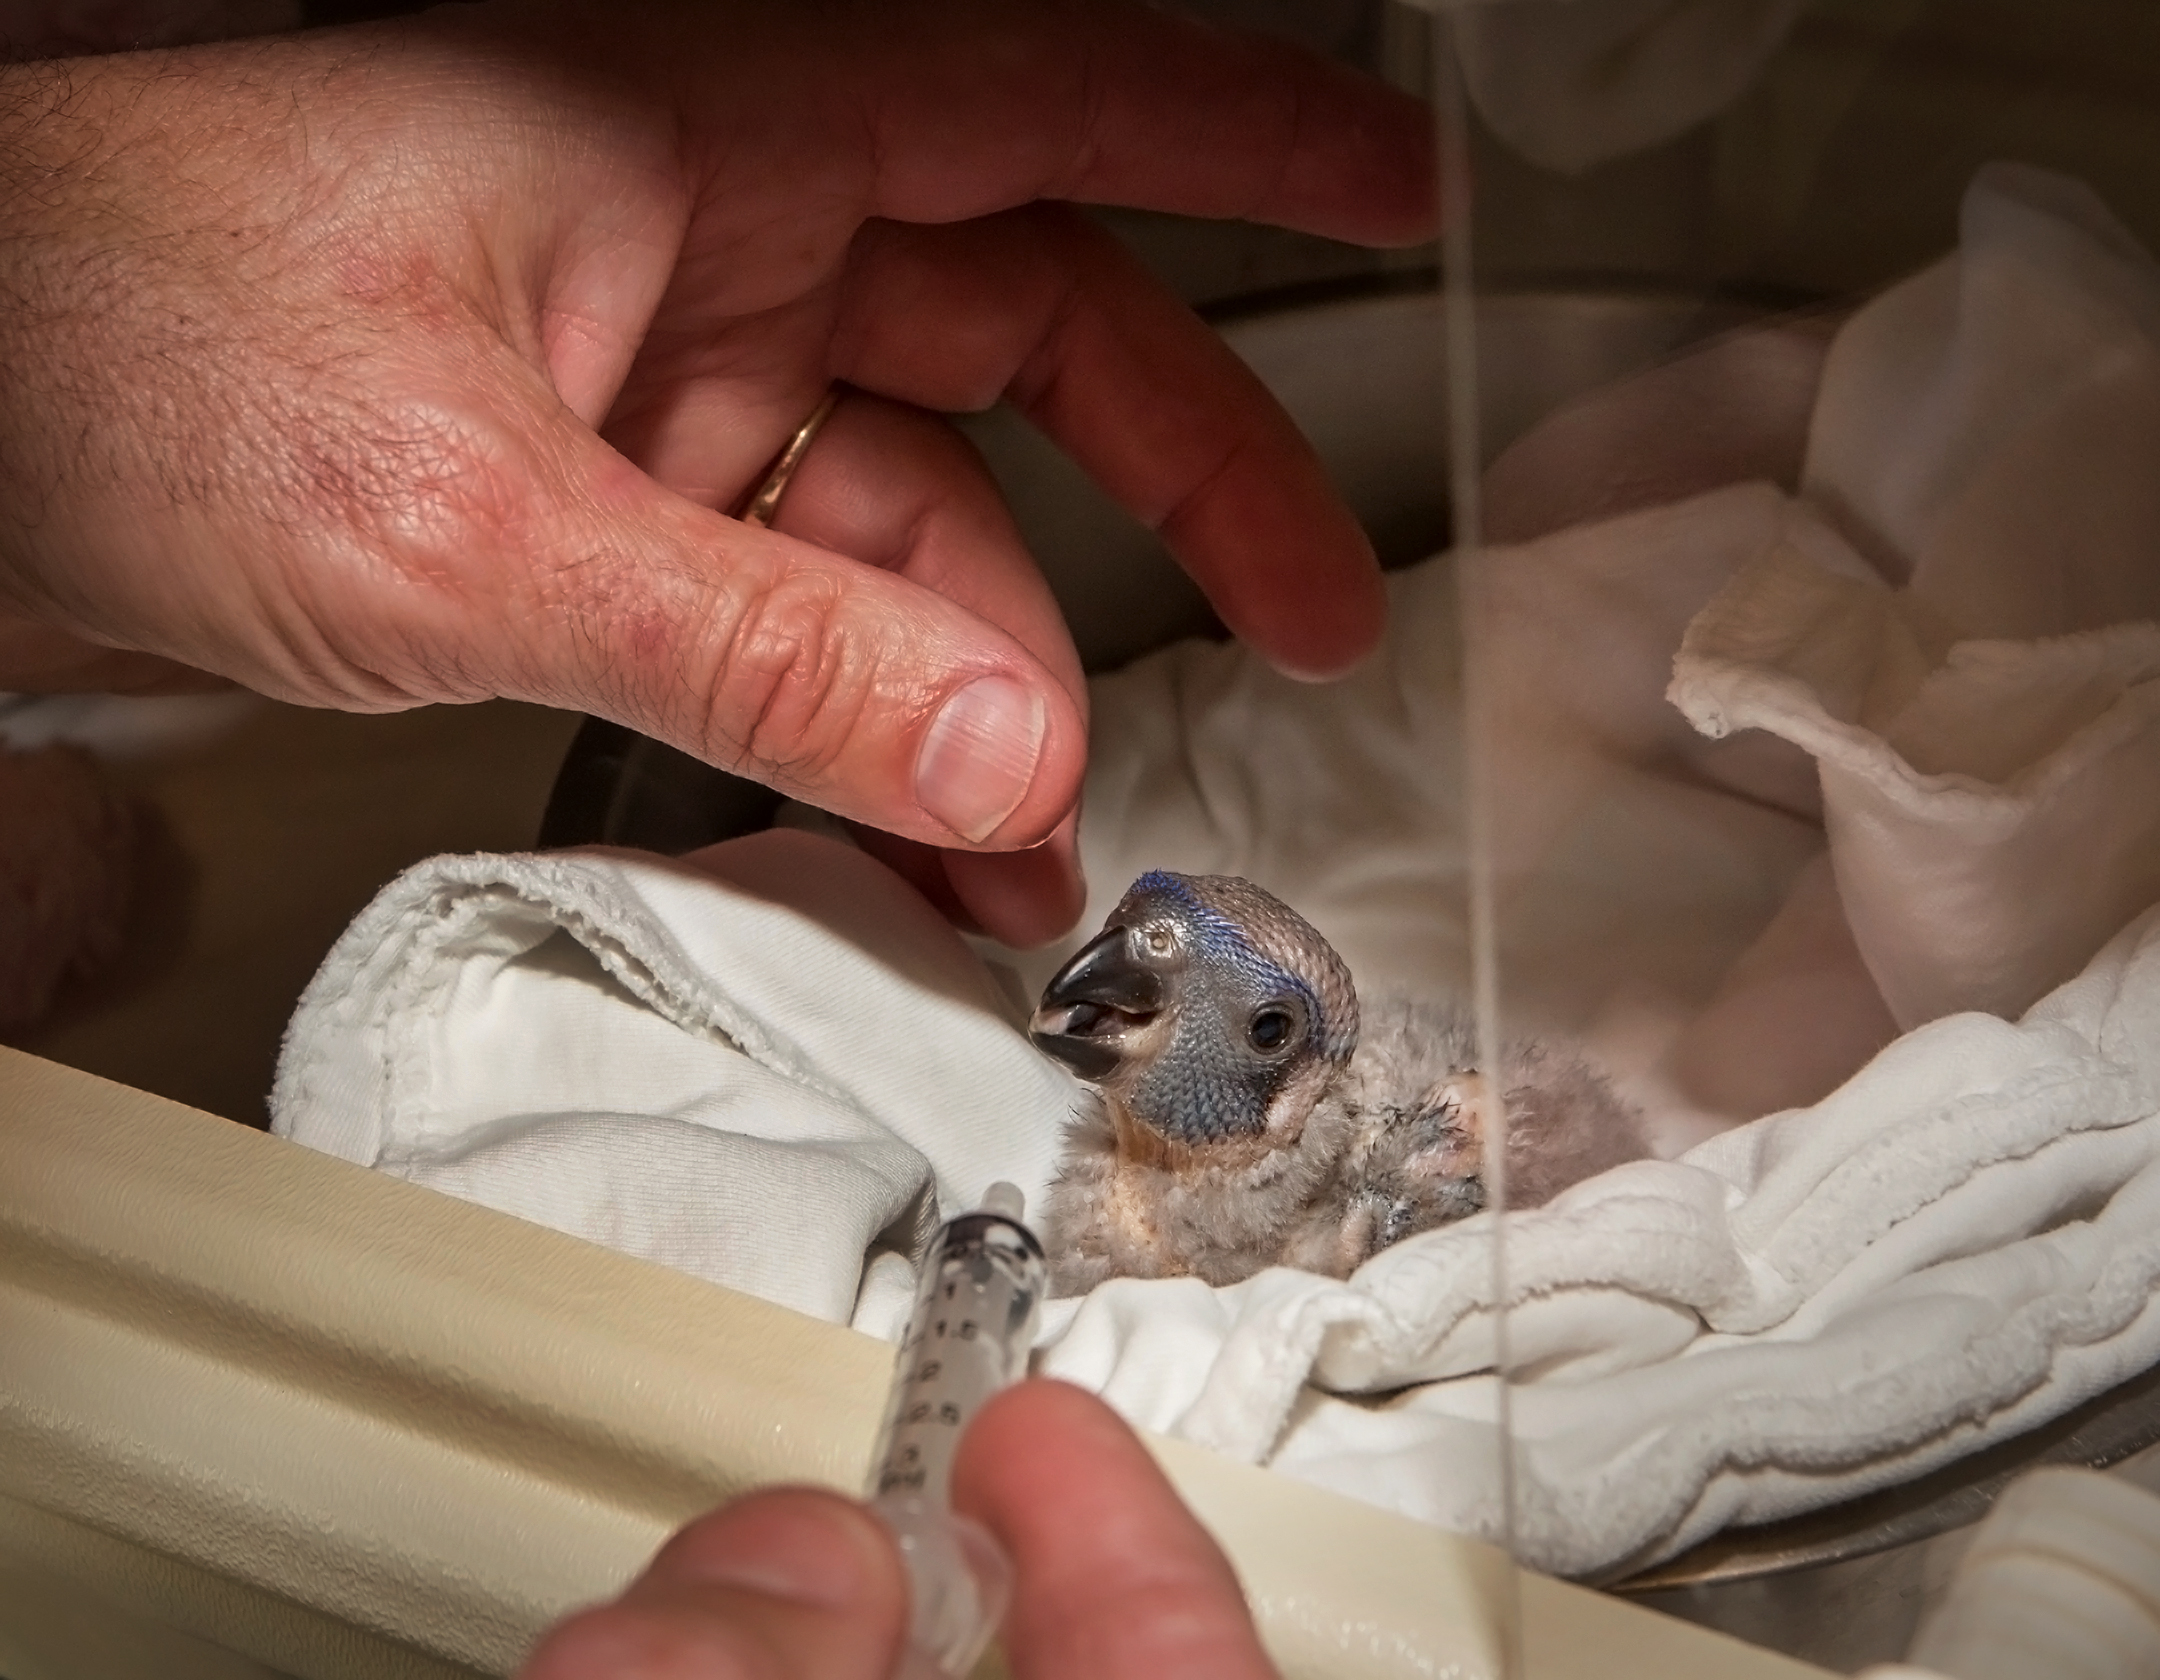 Lorikeet chick being fed by syringe